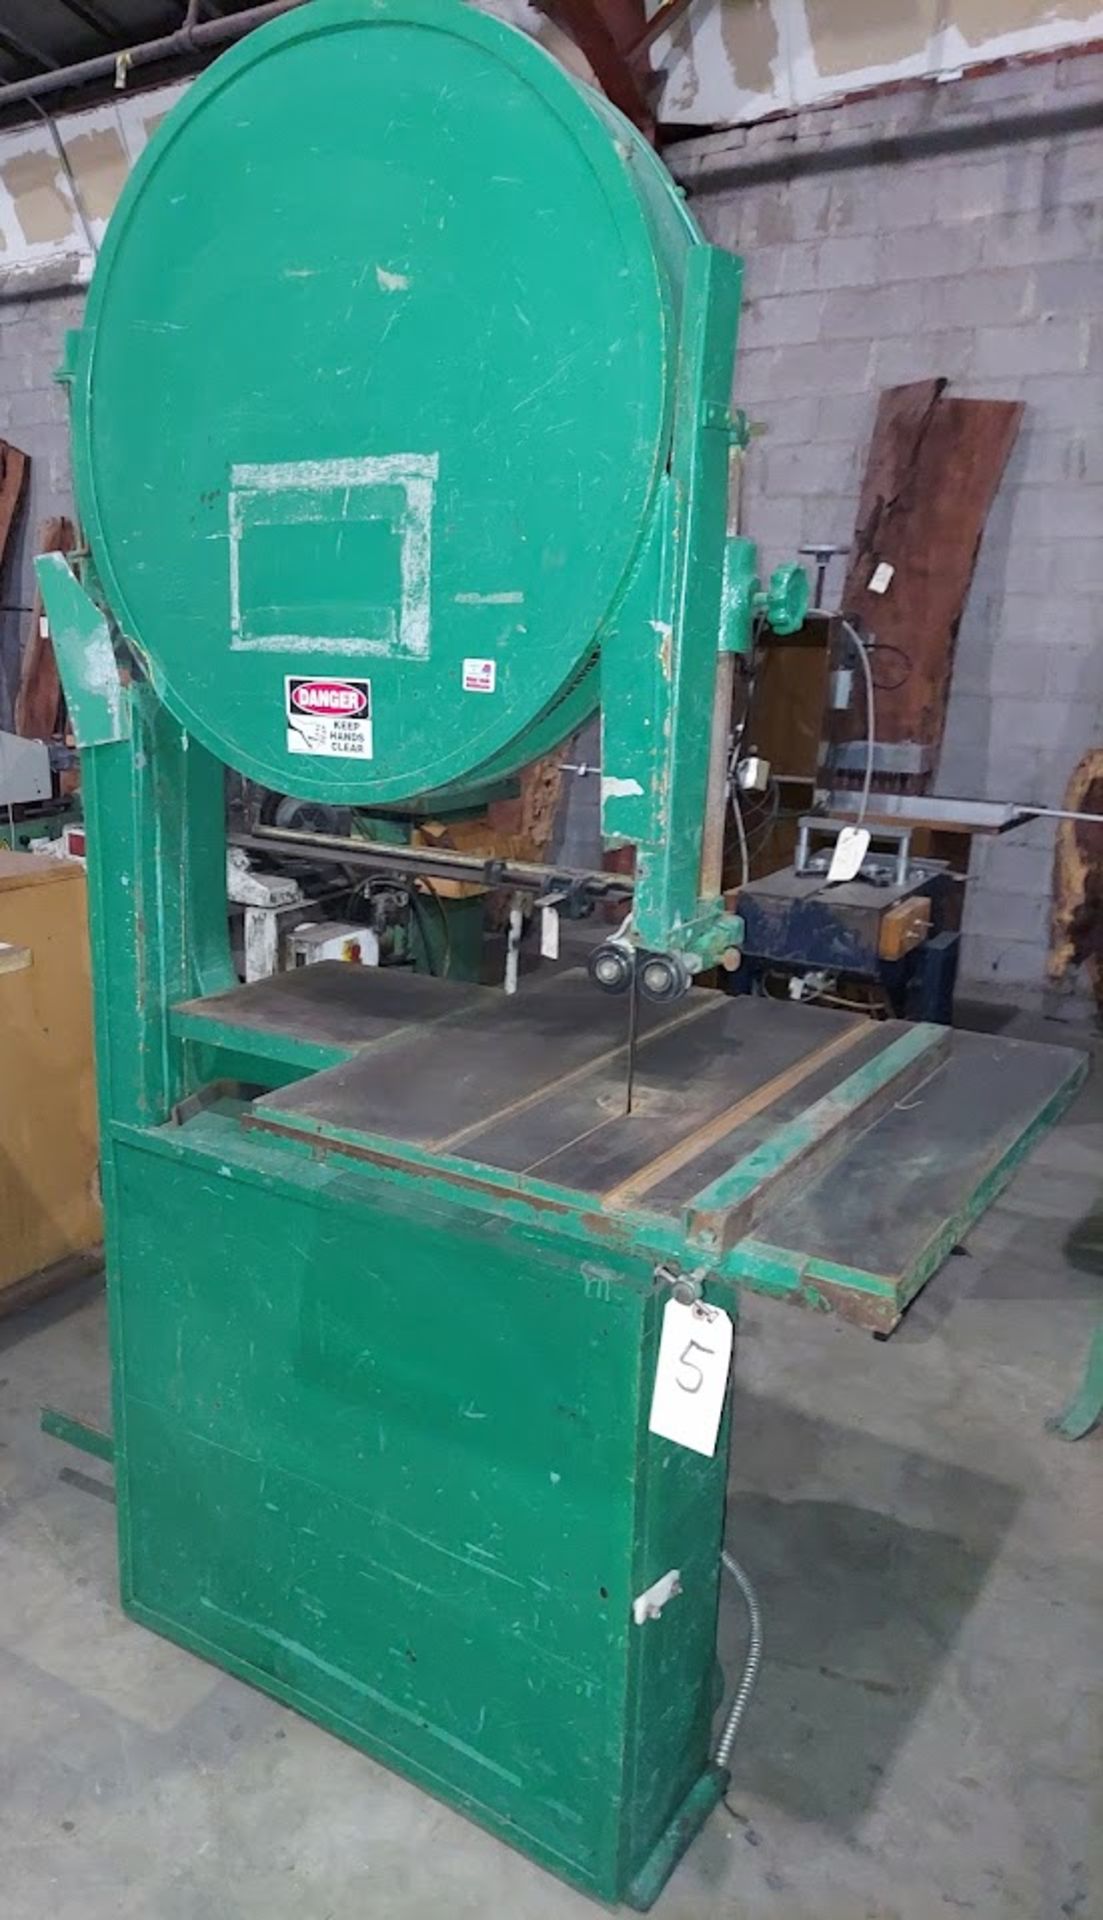 American Sawmill Machinery Co. 28" Band Saw, Motor is 3 HP 220/440 Volt 3ph